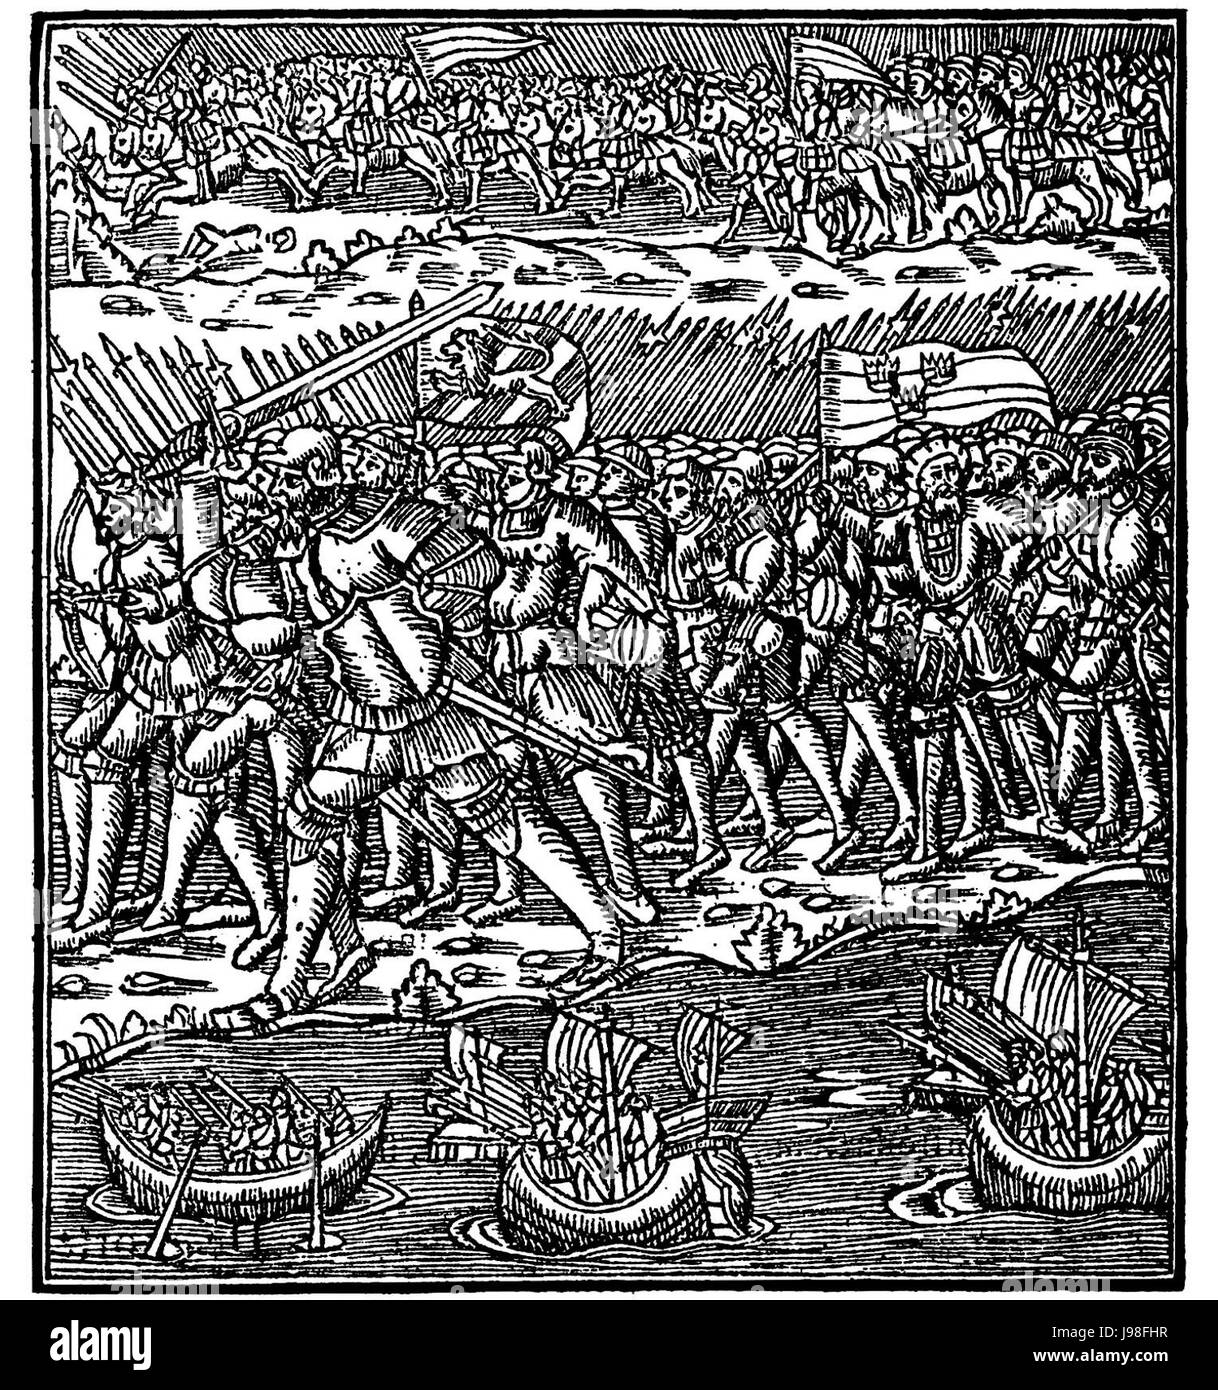 War Between Swedes and Danes   Olaus Magnus 1555 Stock Photo